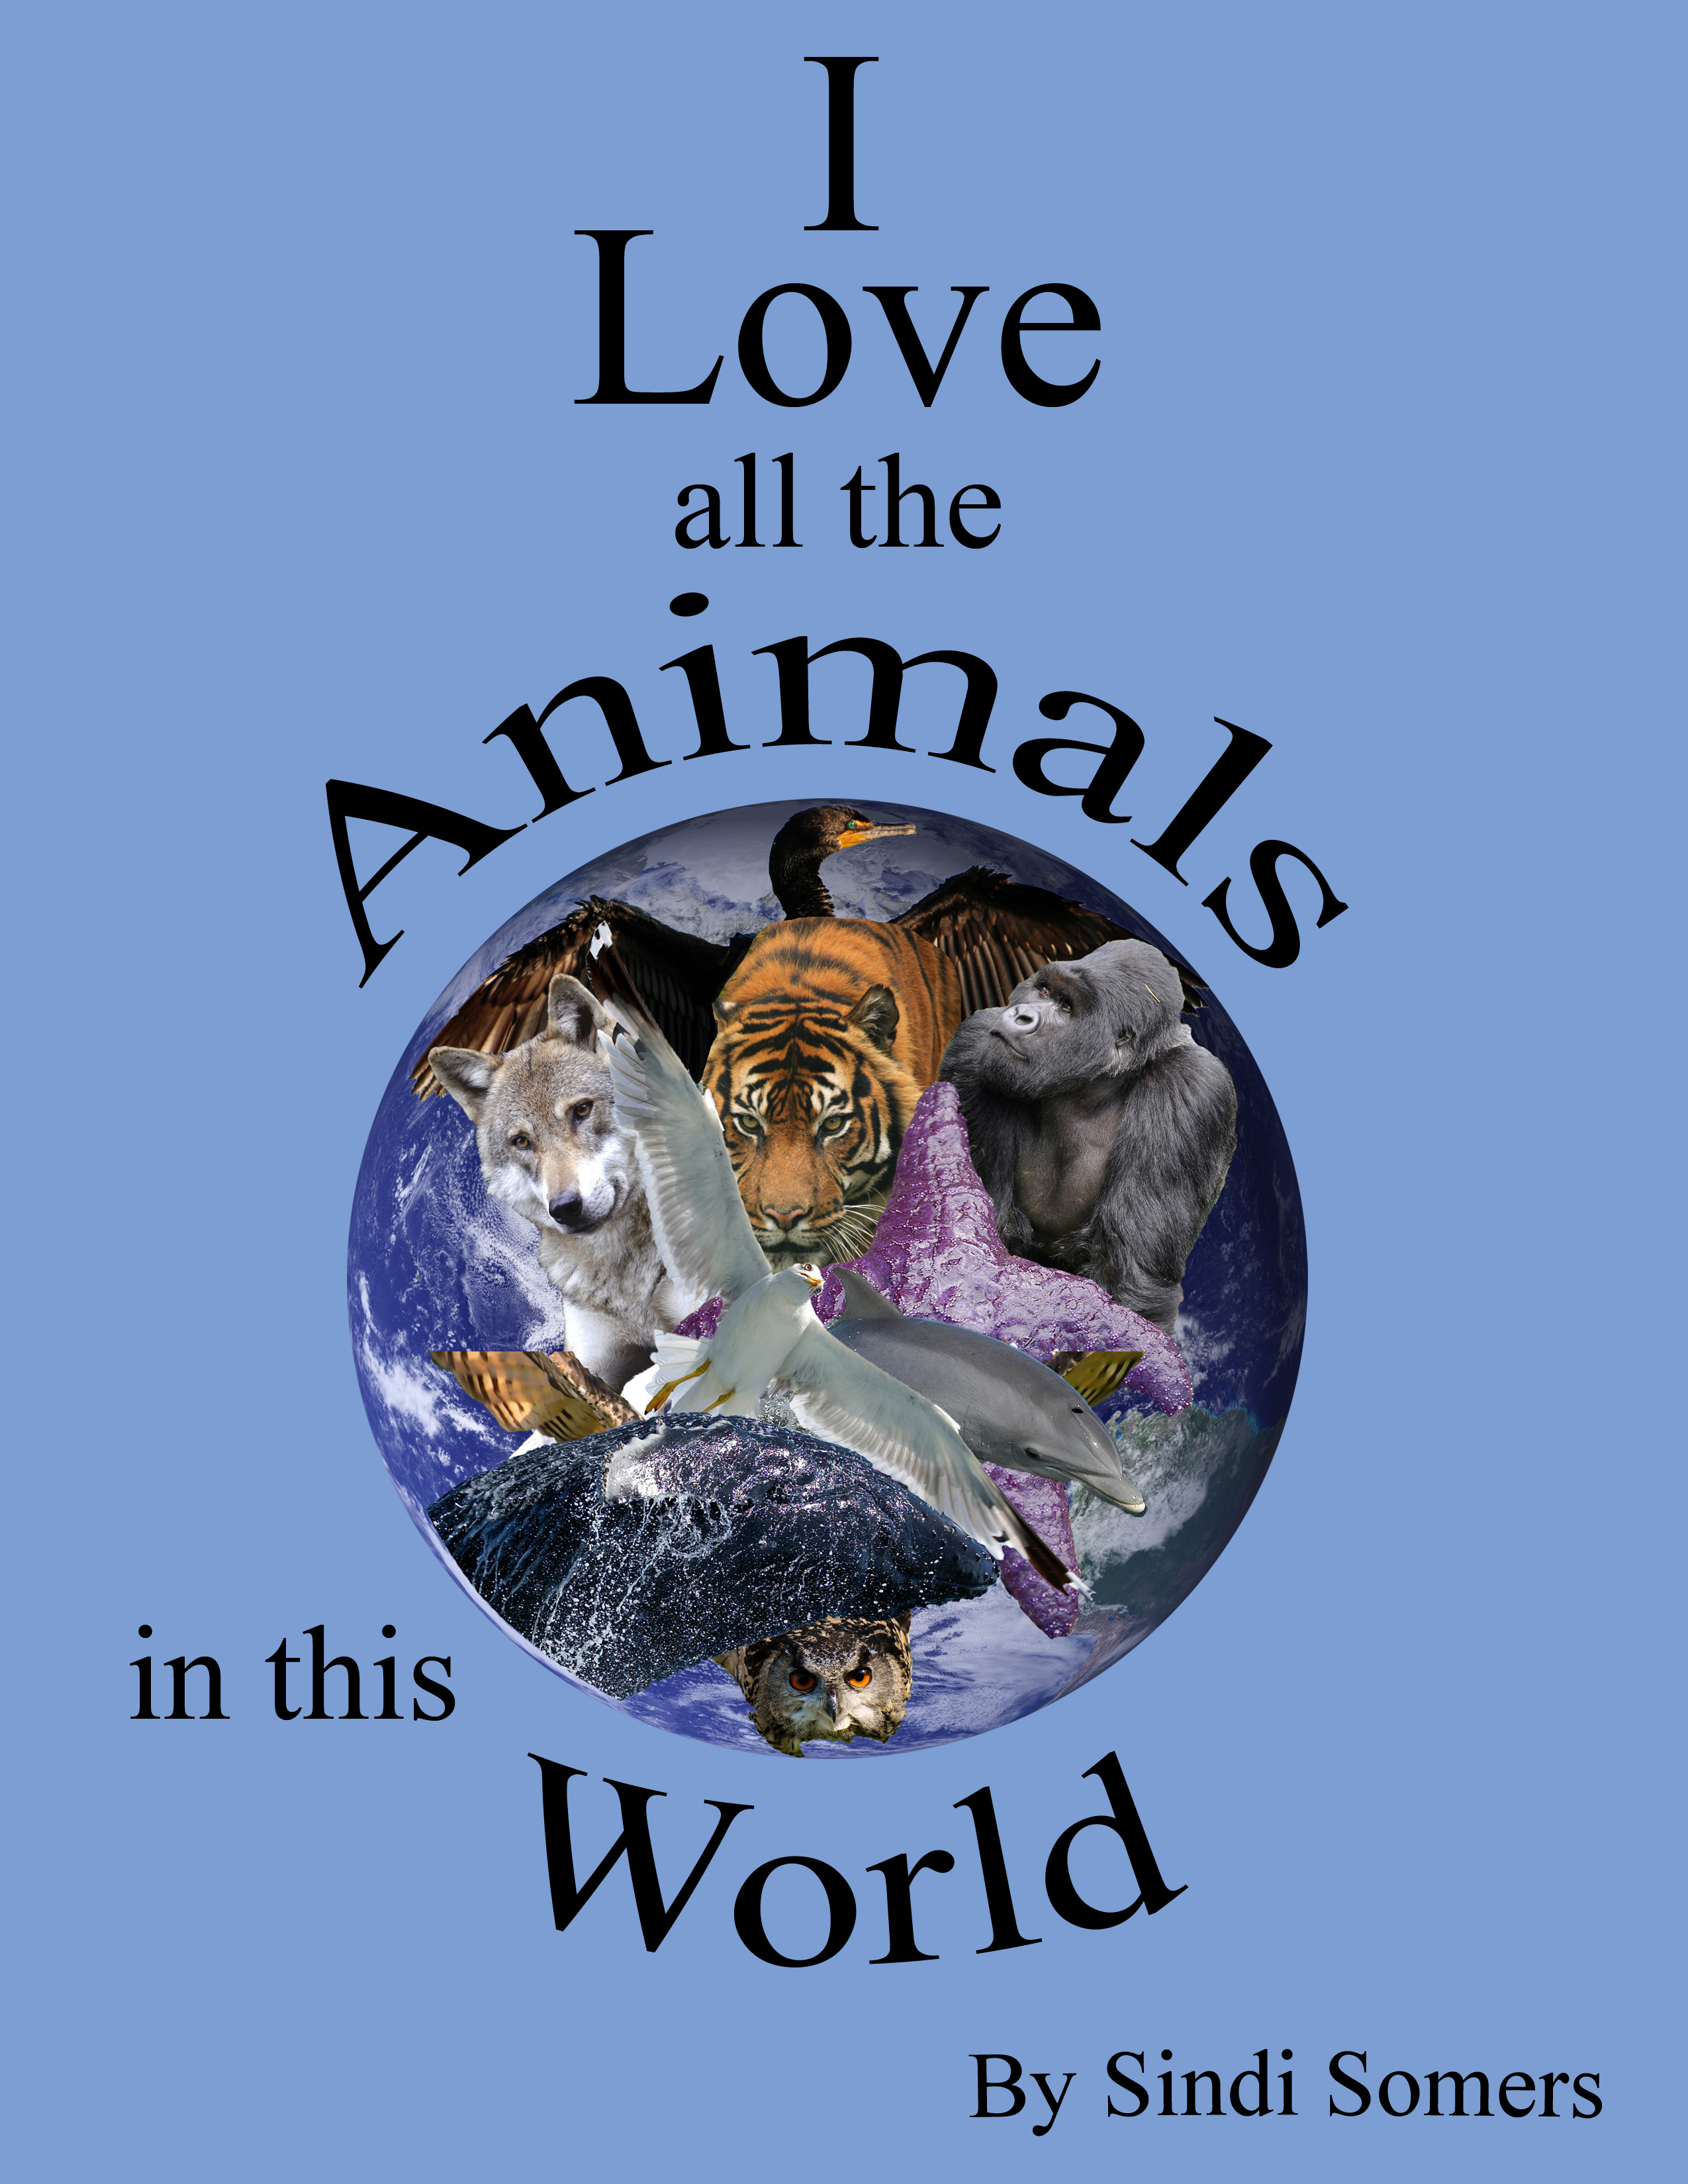 Smashwords – I Love all the Animals in this World – a book by Sindi Somers